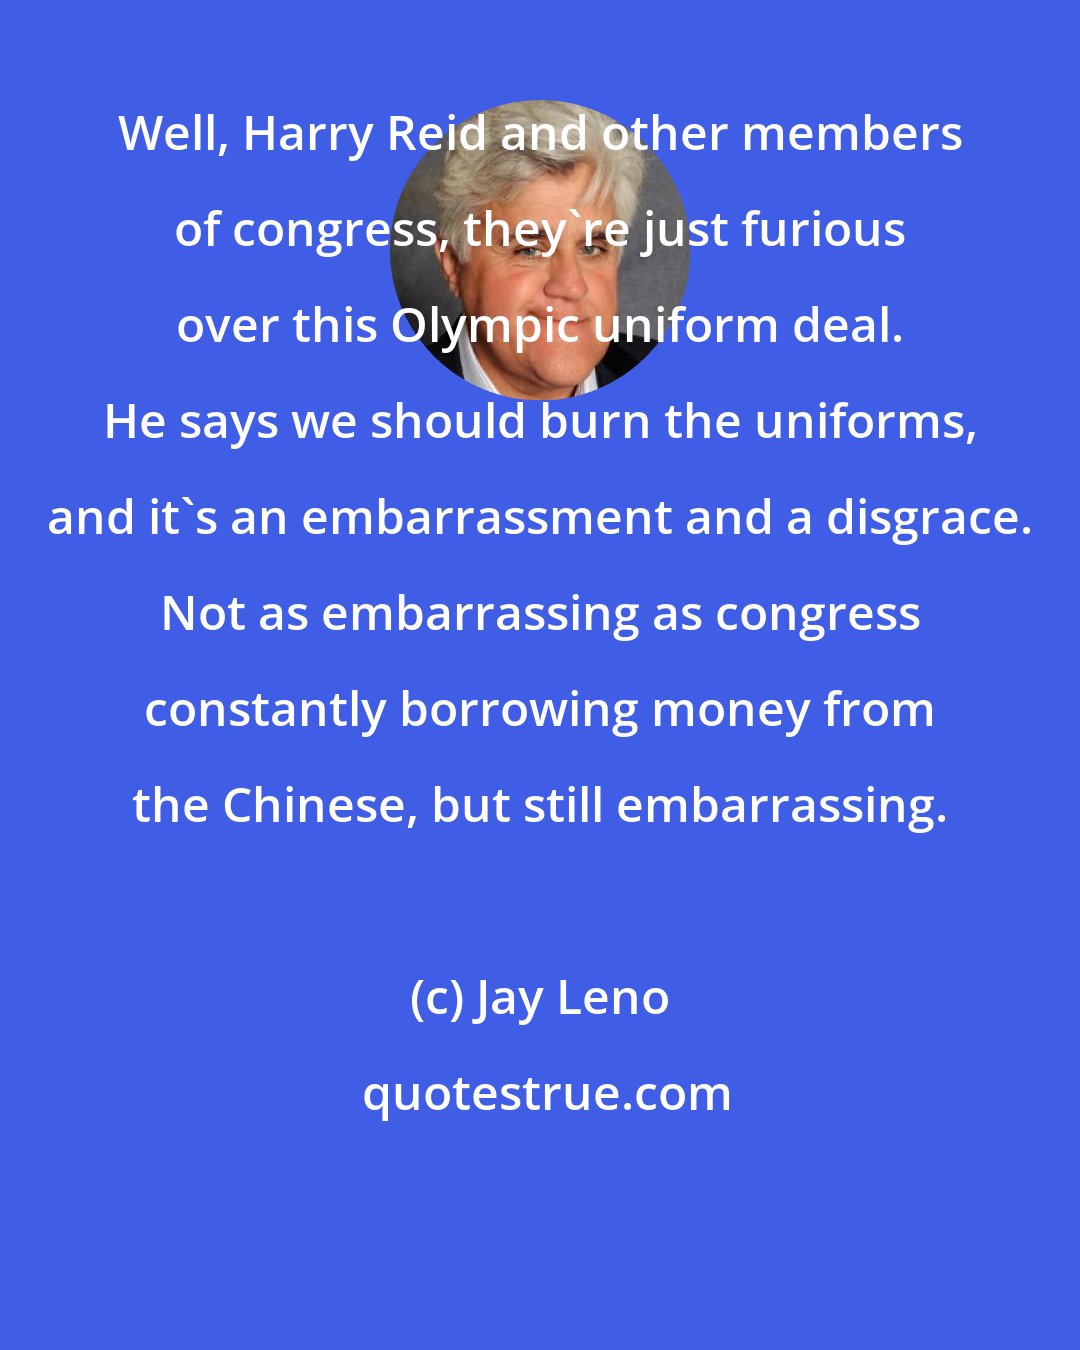 Jay Leno: Well, Harry Reid and other members of congress, they're just furious over this Olympic uniform deal. He says we should burn the uniforms, and it's an embarrassment and a disgrace. Not as embarrassing as congress constantly borrowing money from the Chinese, but still embarrassing.